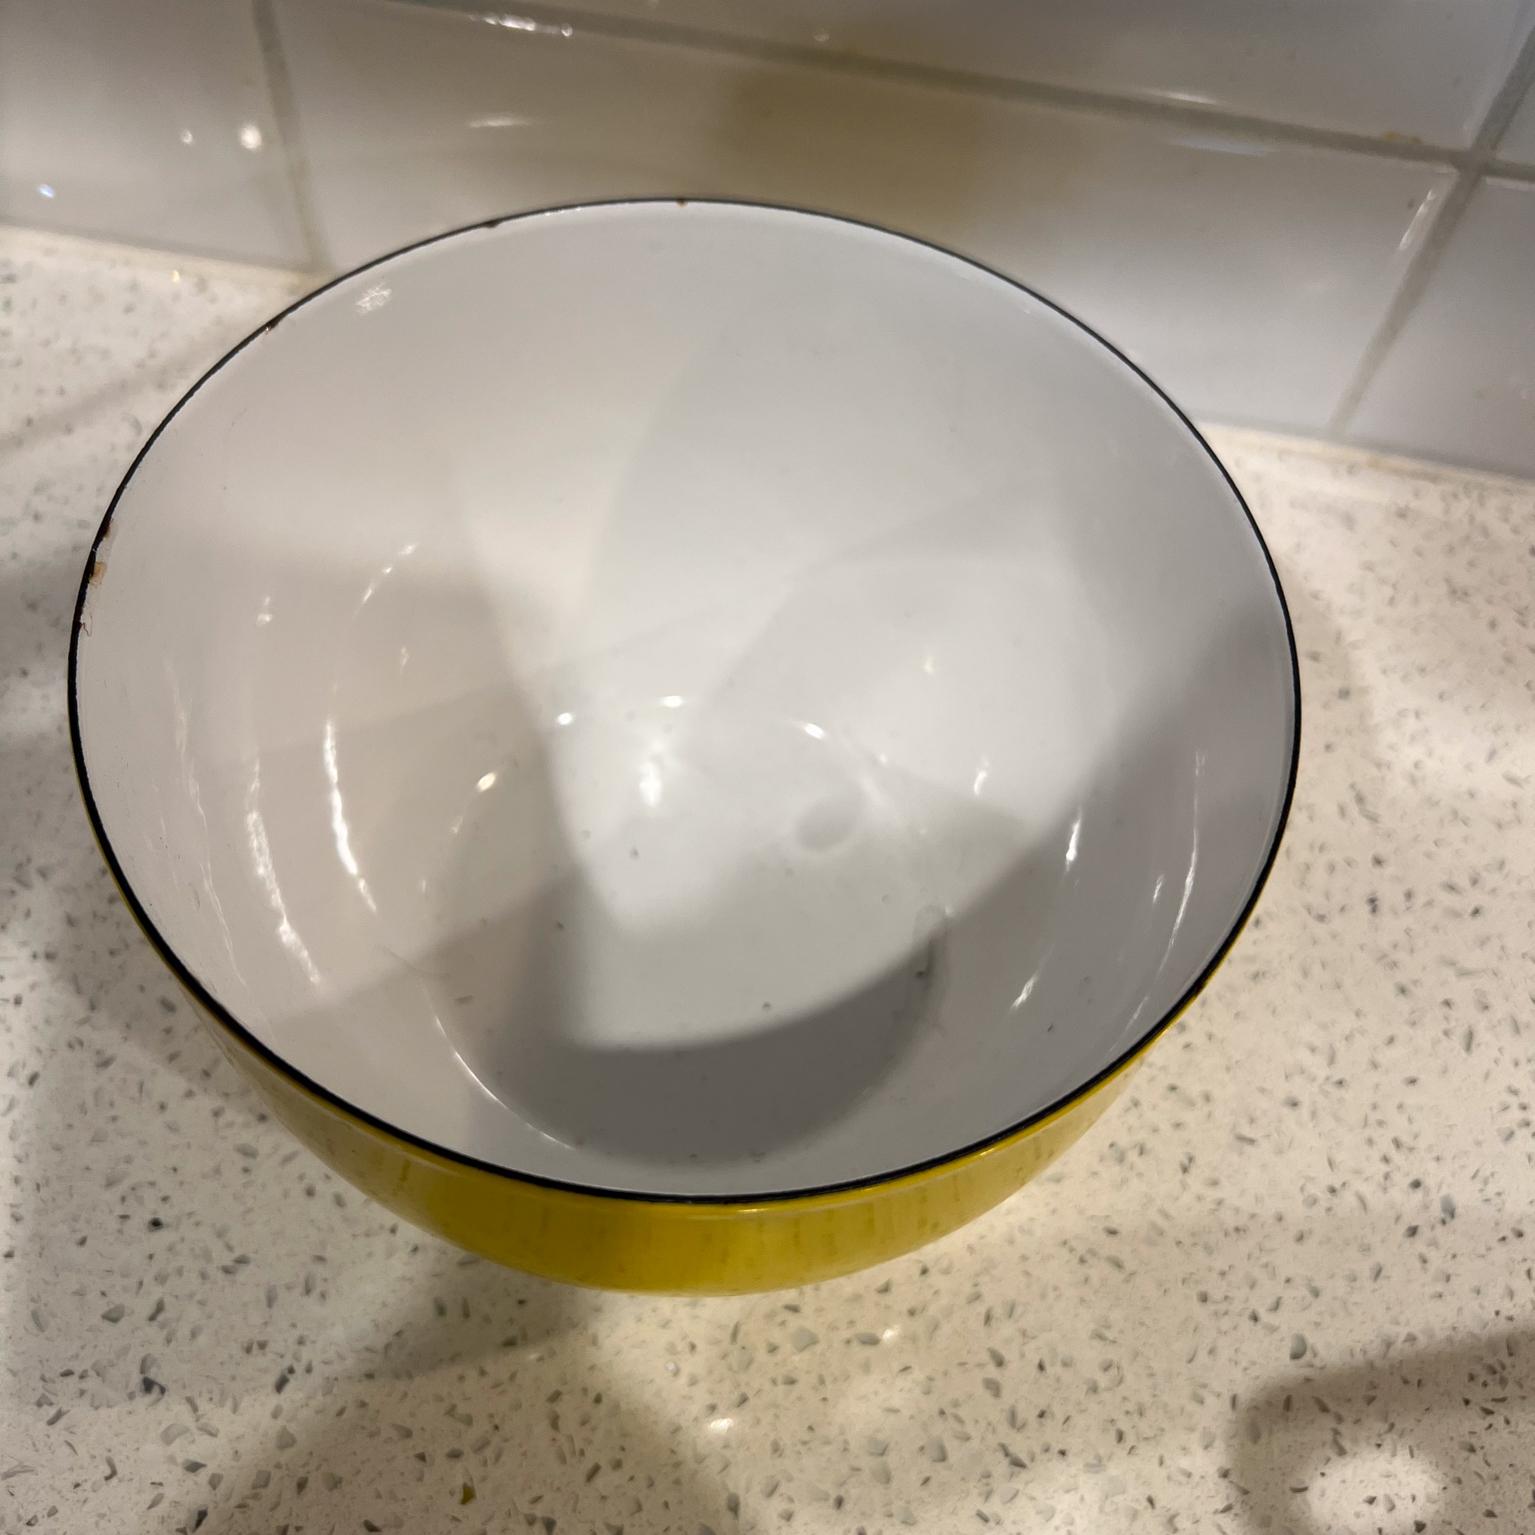 Scandinavian Modern Yellow Enamel Serving Mixing Bowl In Good Condition For Sale In Chula Vista, CA